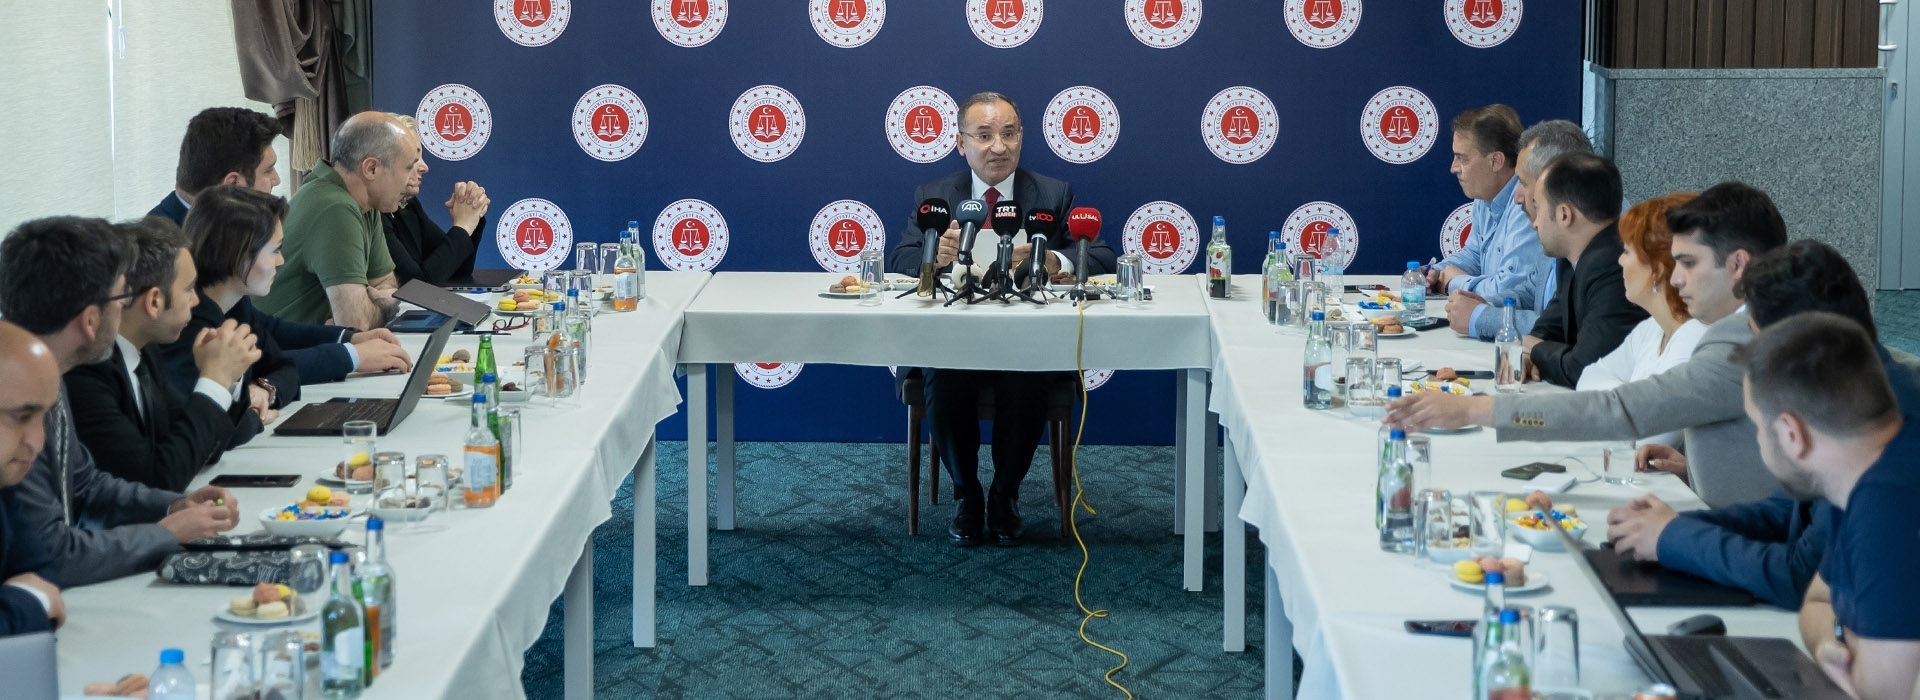 MINISTER BOZDAĞ: NO INDIVIDUAL CAN GIVE ORDERS OR INSTRUCTIONS TO MEMBERS OF THE JUDICIARY Duyuru Görseli